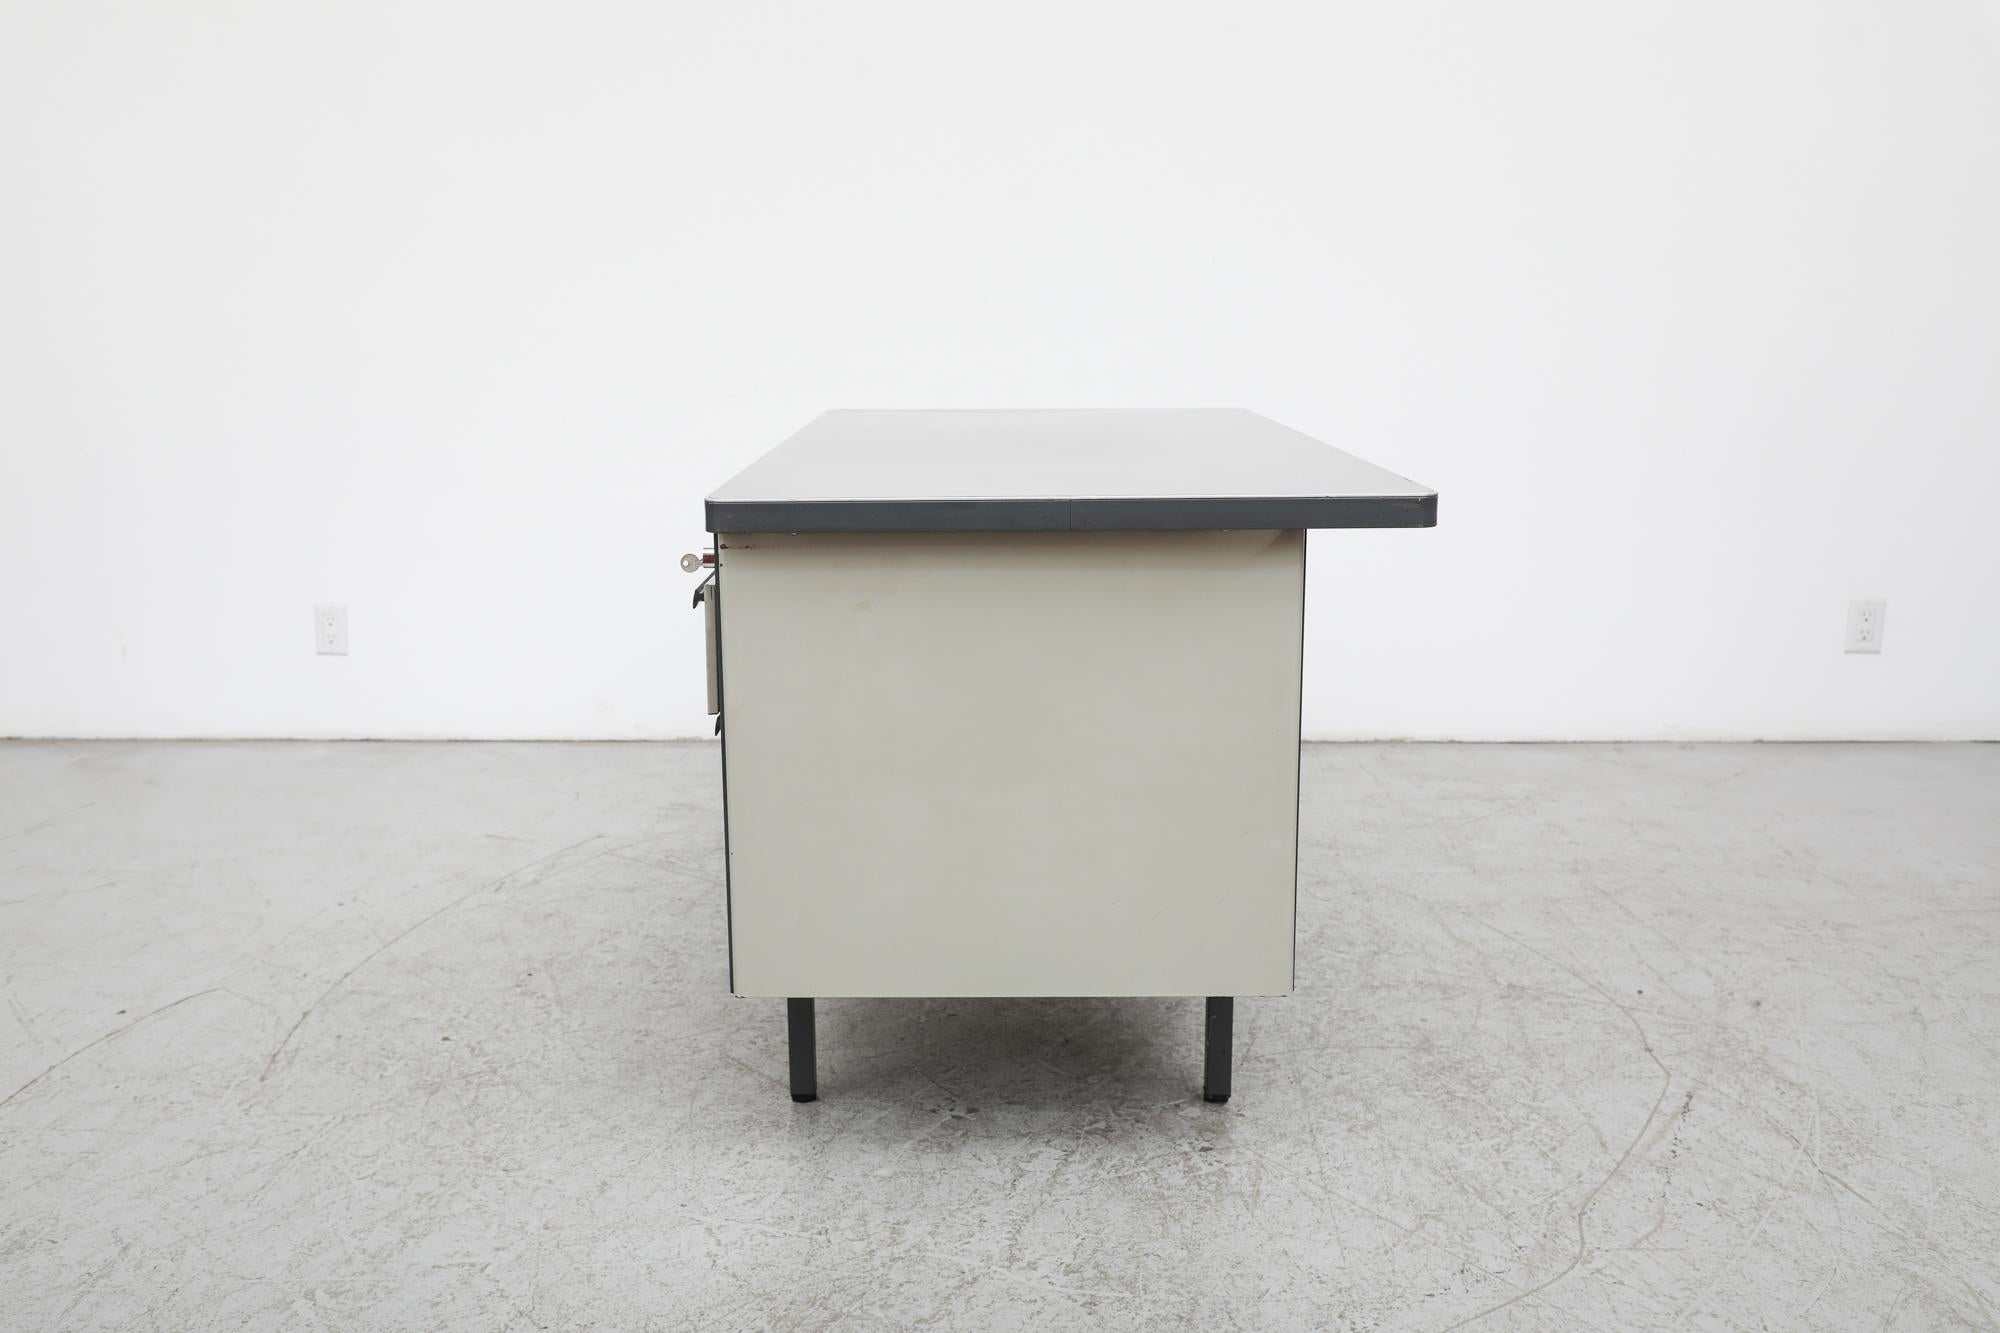 Enameled Mid-Century Heavy Gray Strafor Desk from the Netherlands, w/ File Storage 1960s For Sale